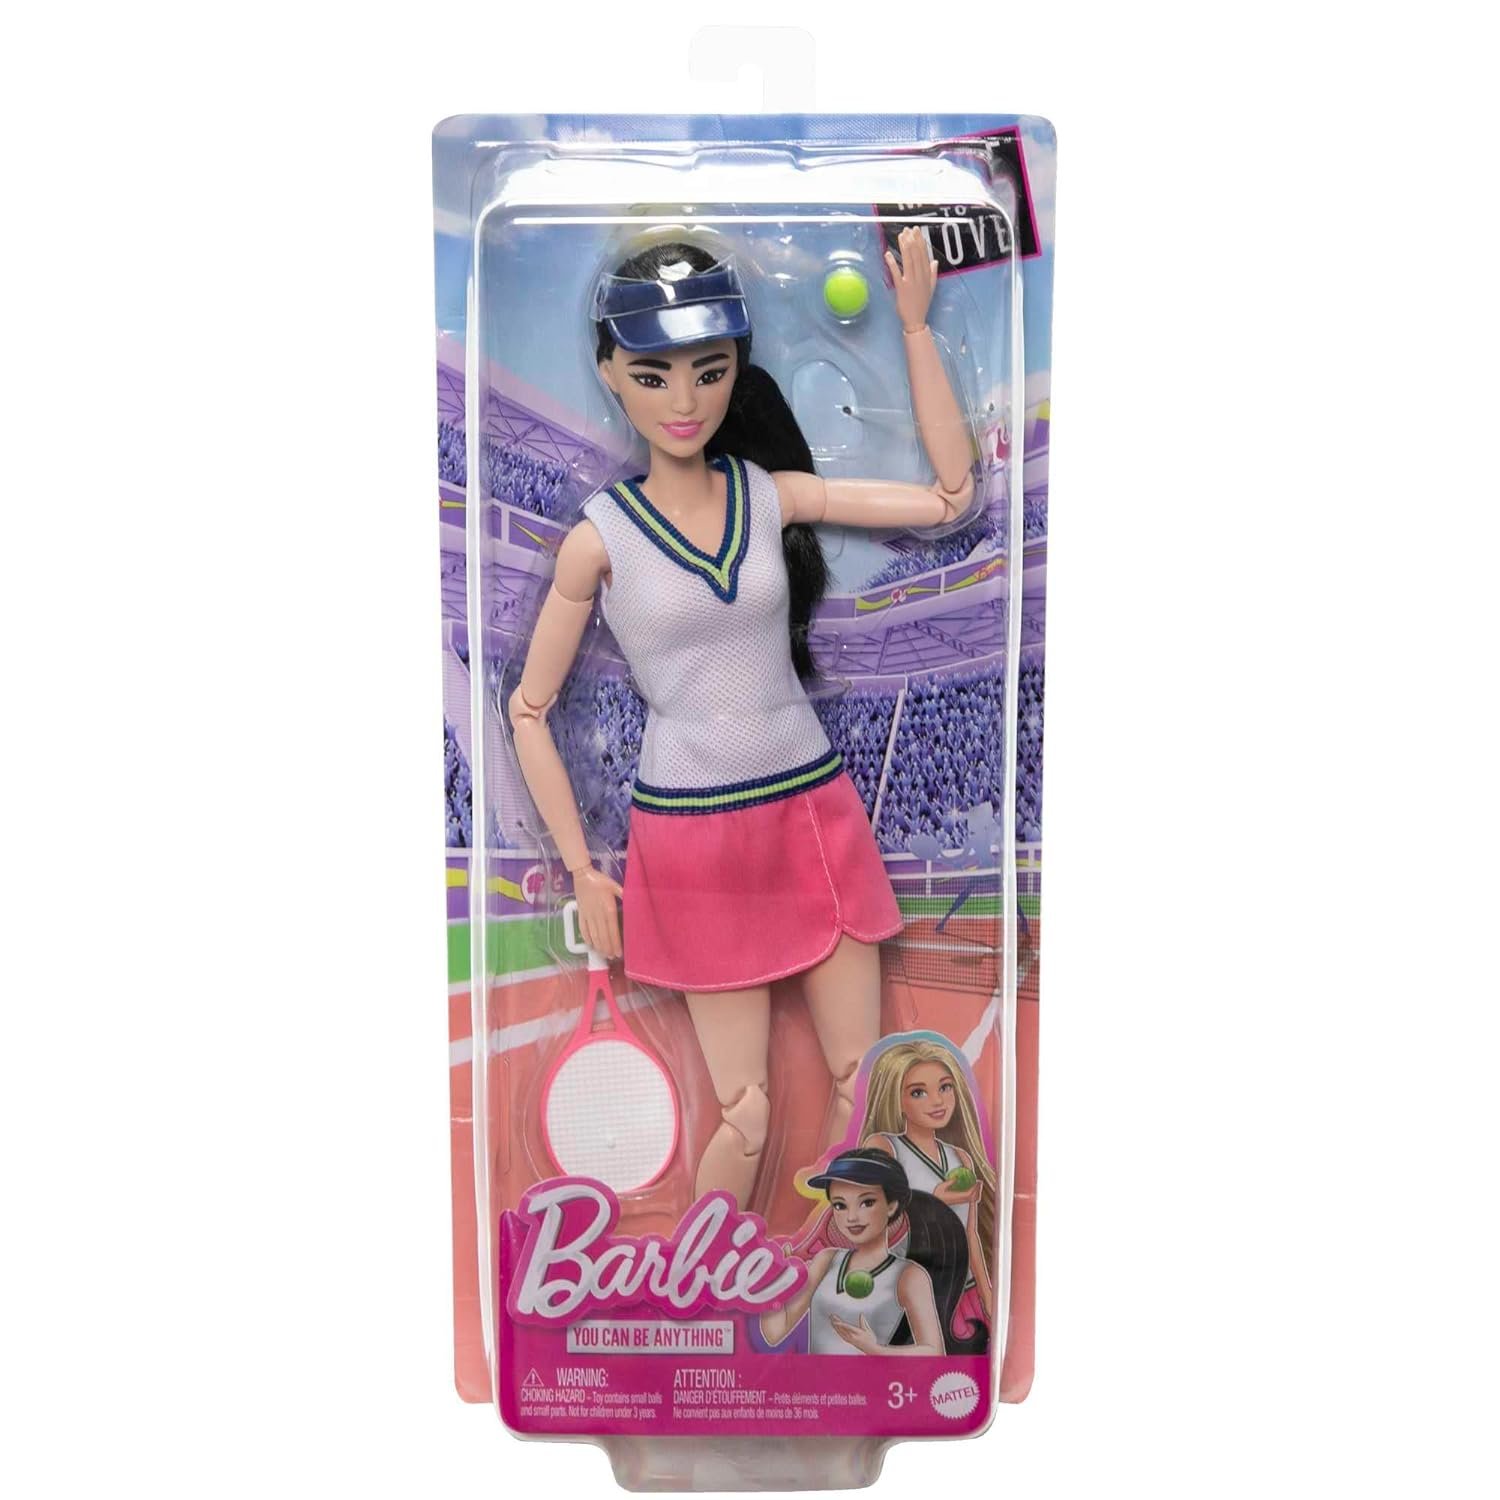 Barbie Tennis Player Doll image 4